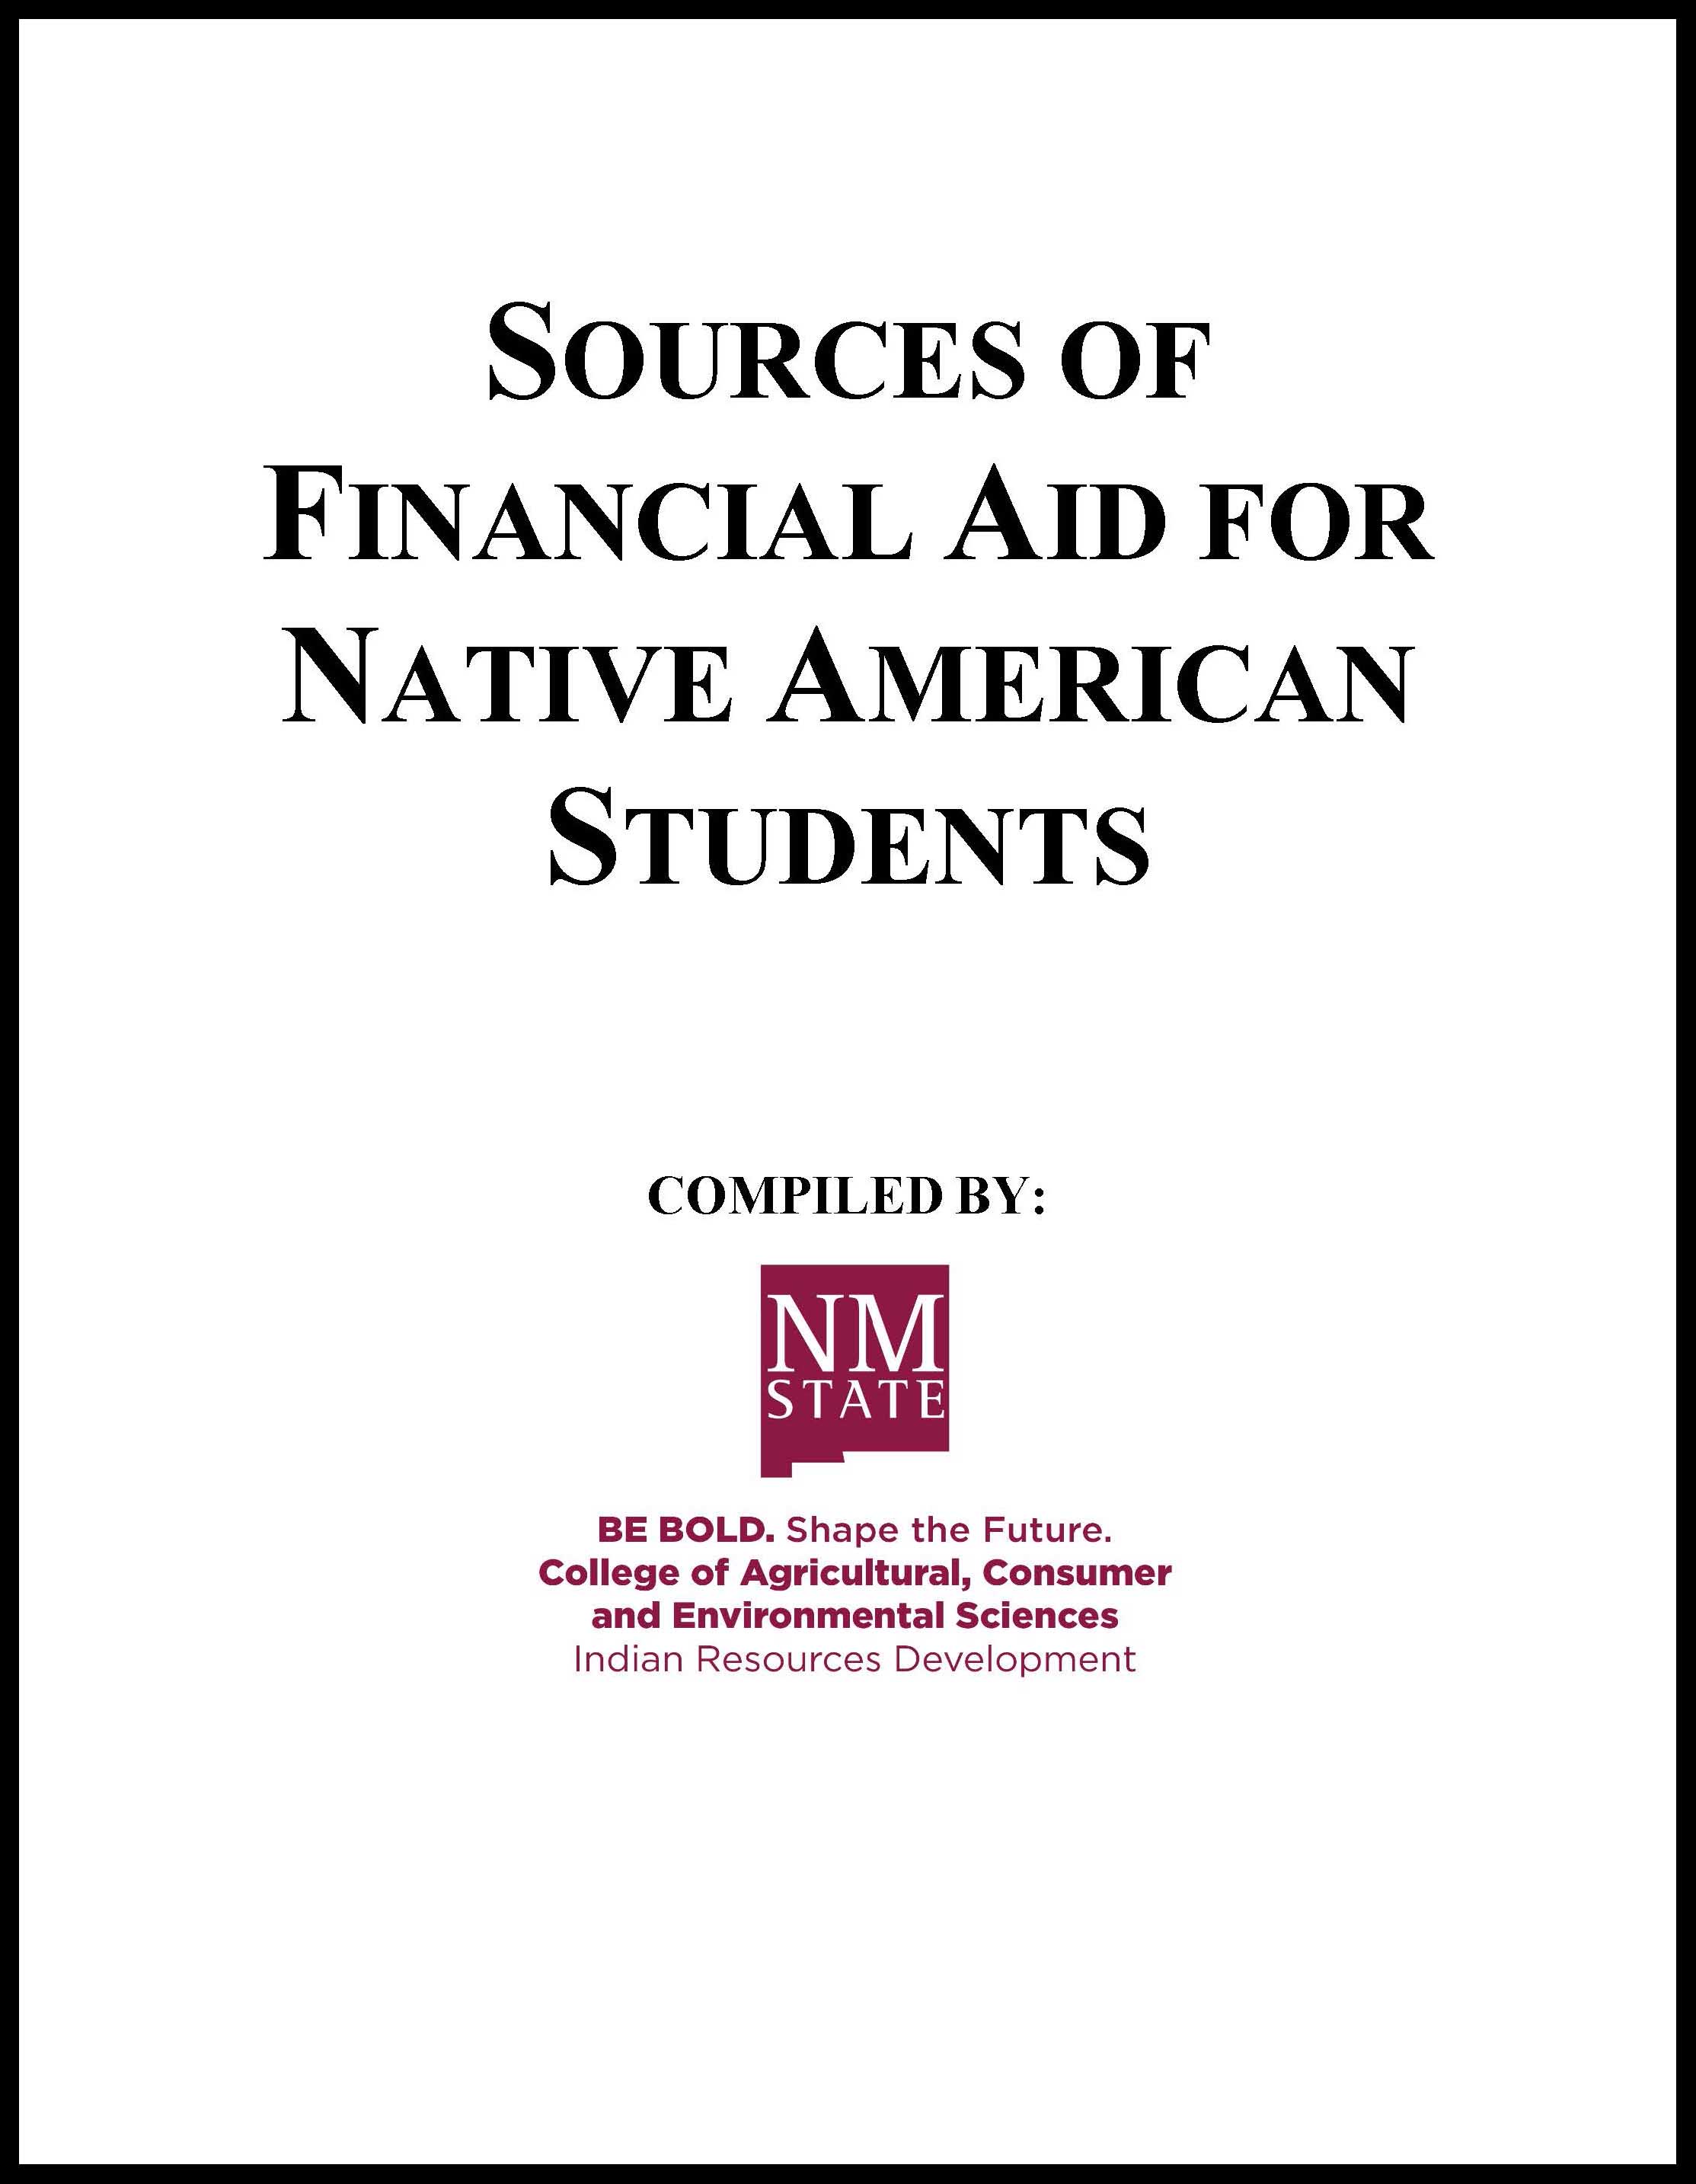 The cover of the financial booklet